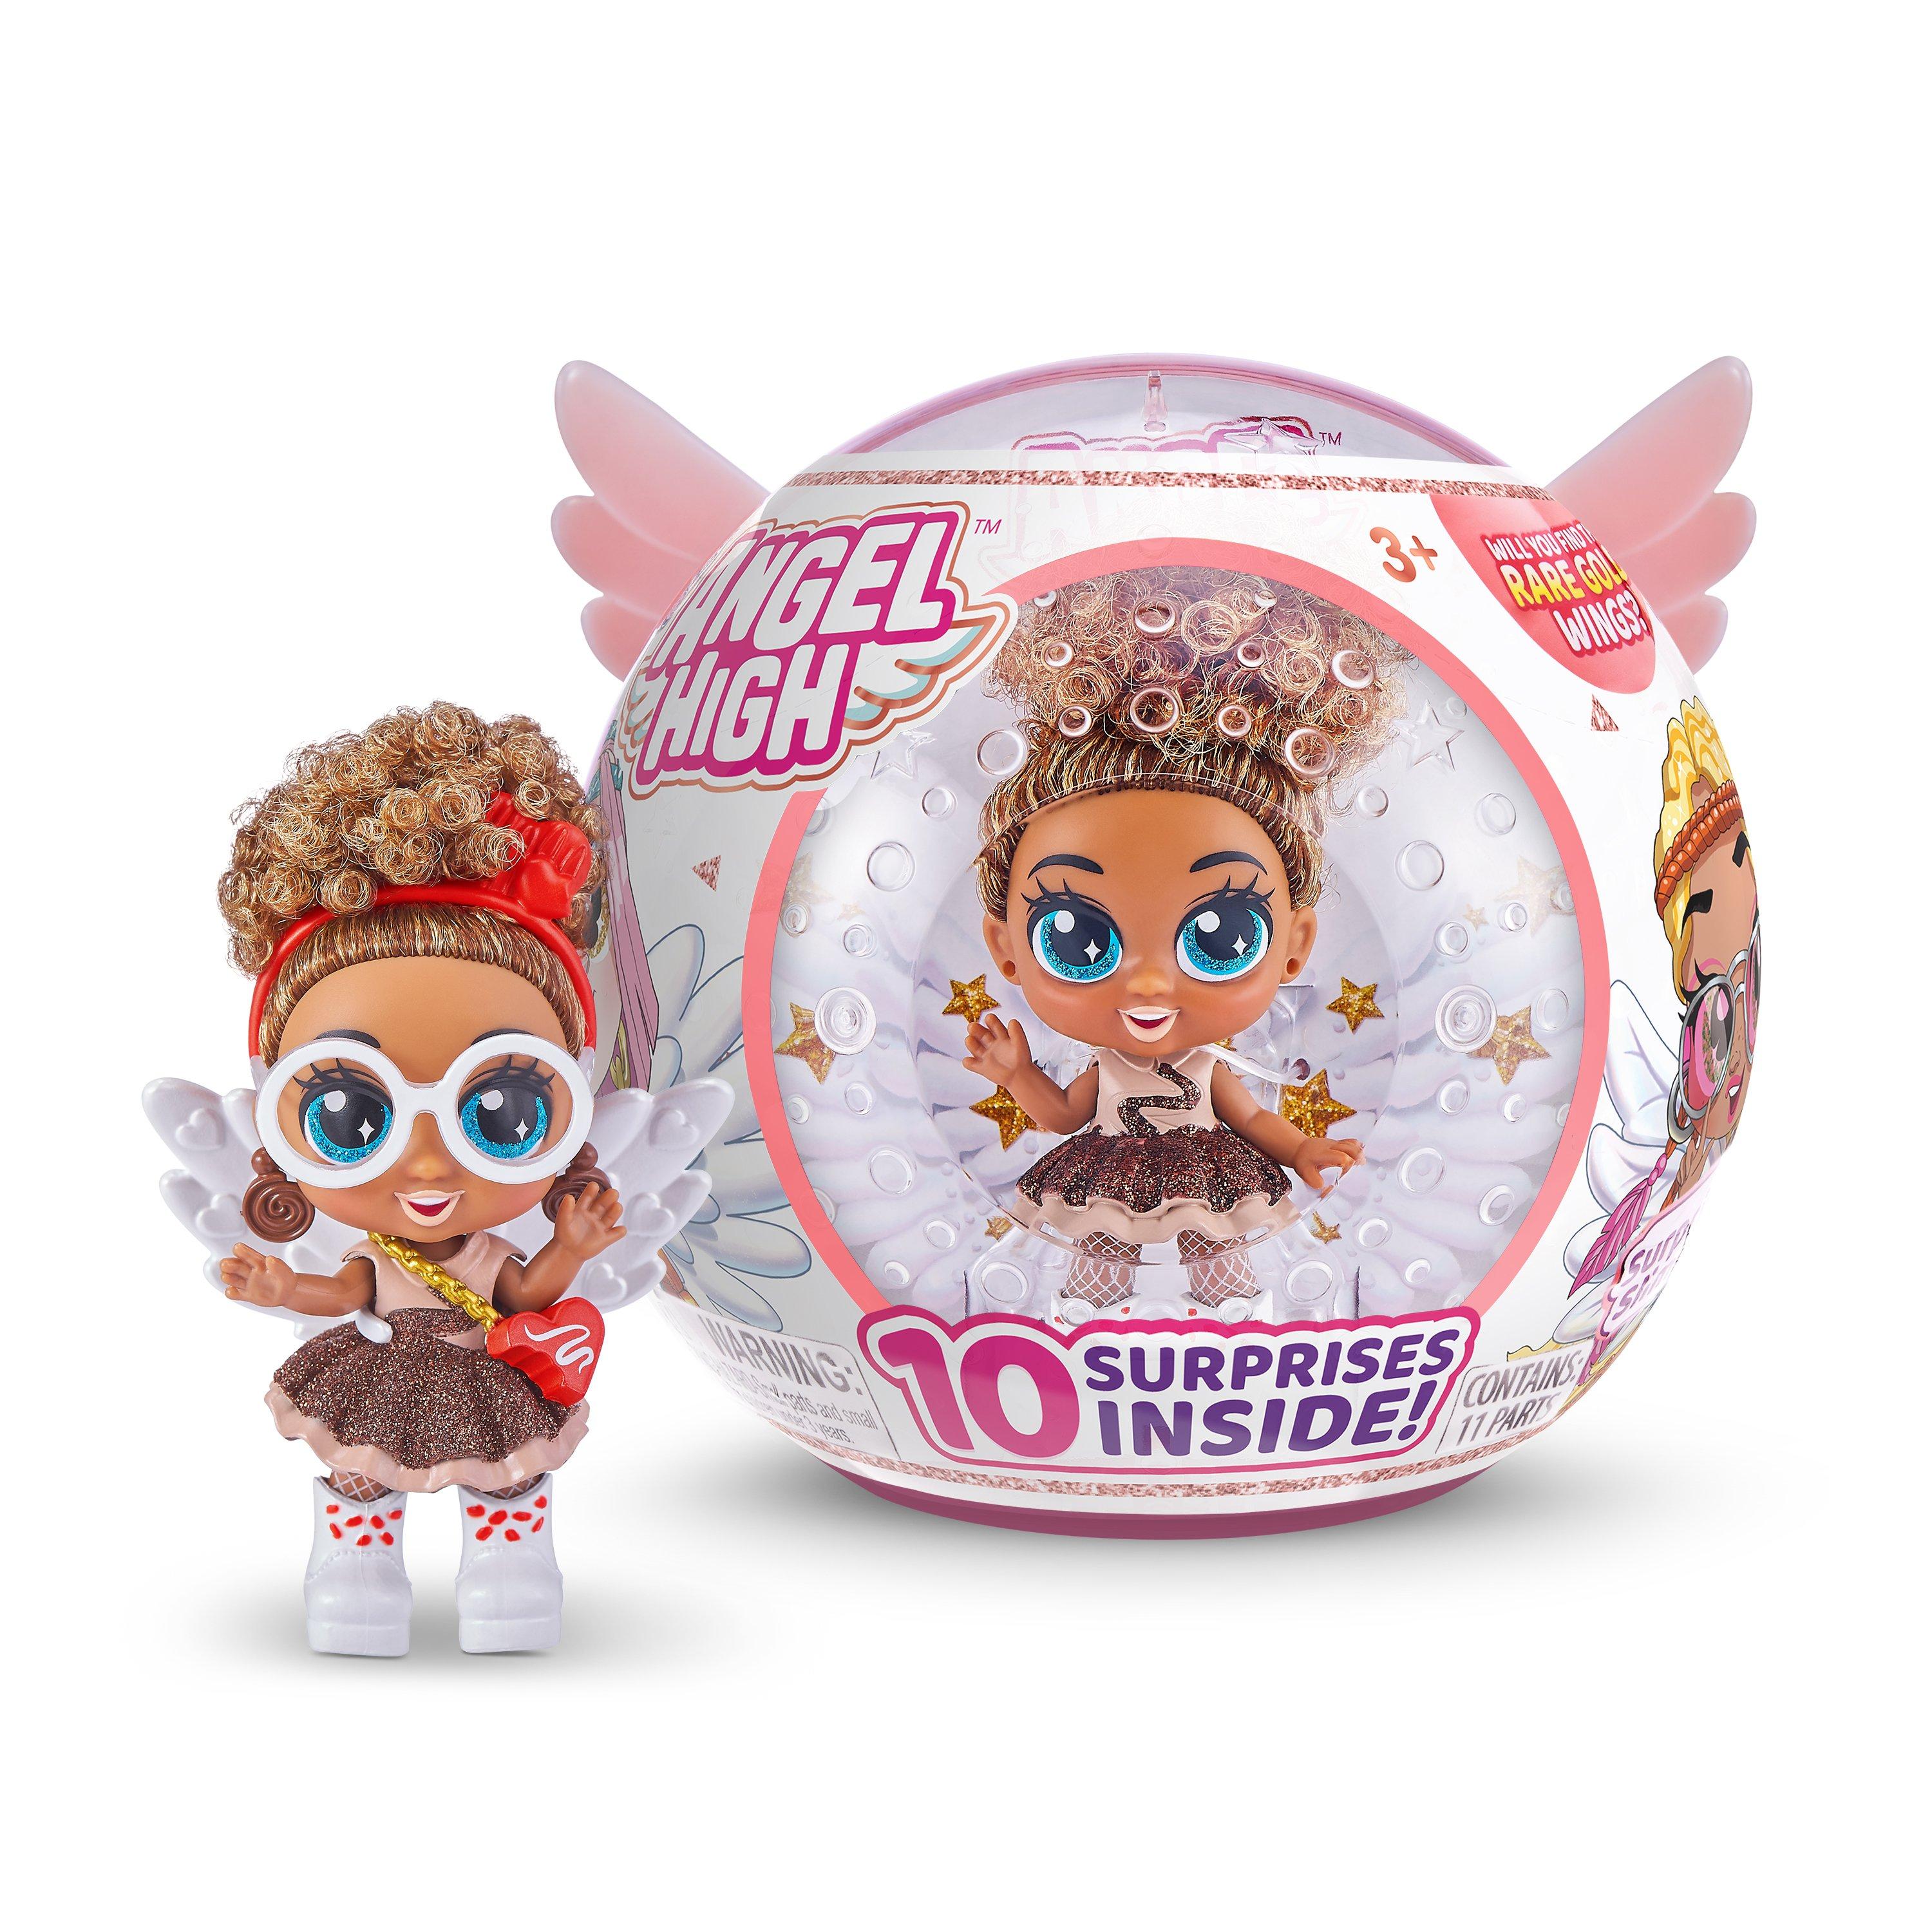 ZURU Itty Bitty Prettys Angel High Series 1 Capsule Doll With 10 Surprise Accessories Inside?fmt=auto